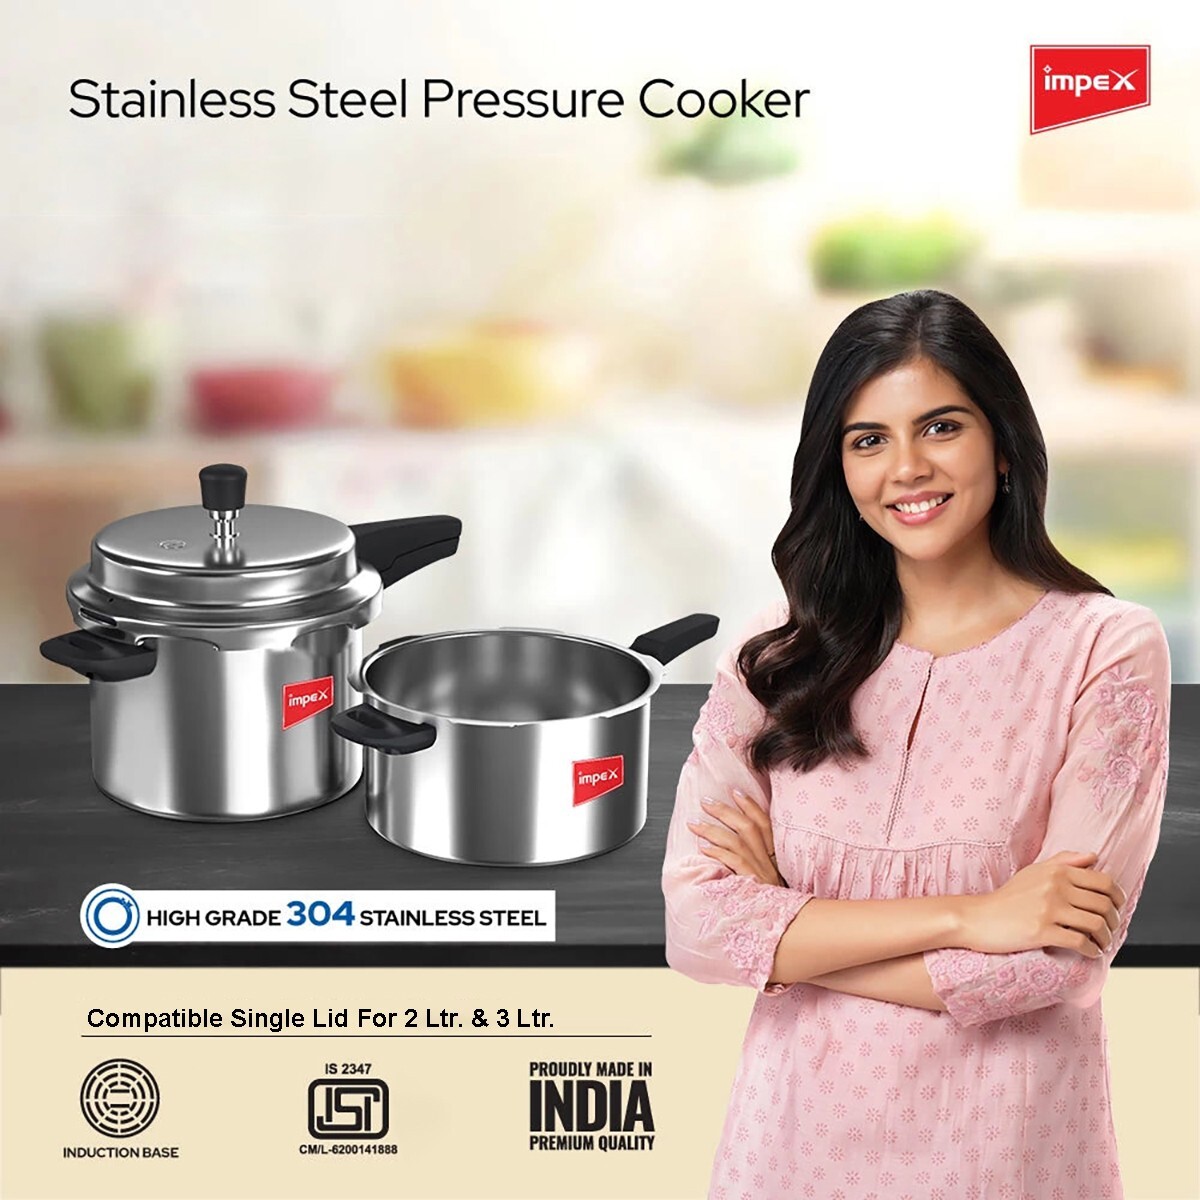 Impex Stainless Steel Pressure Cooker Combo EP235 Color Box